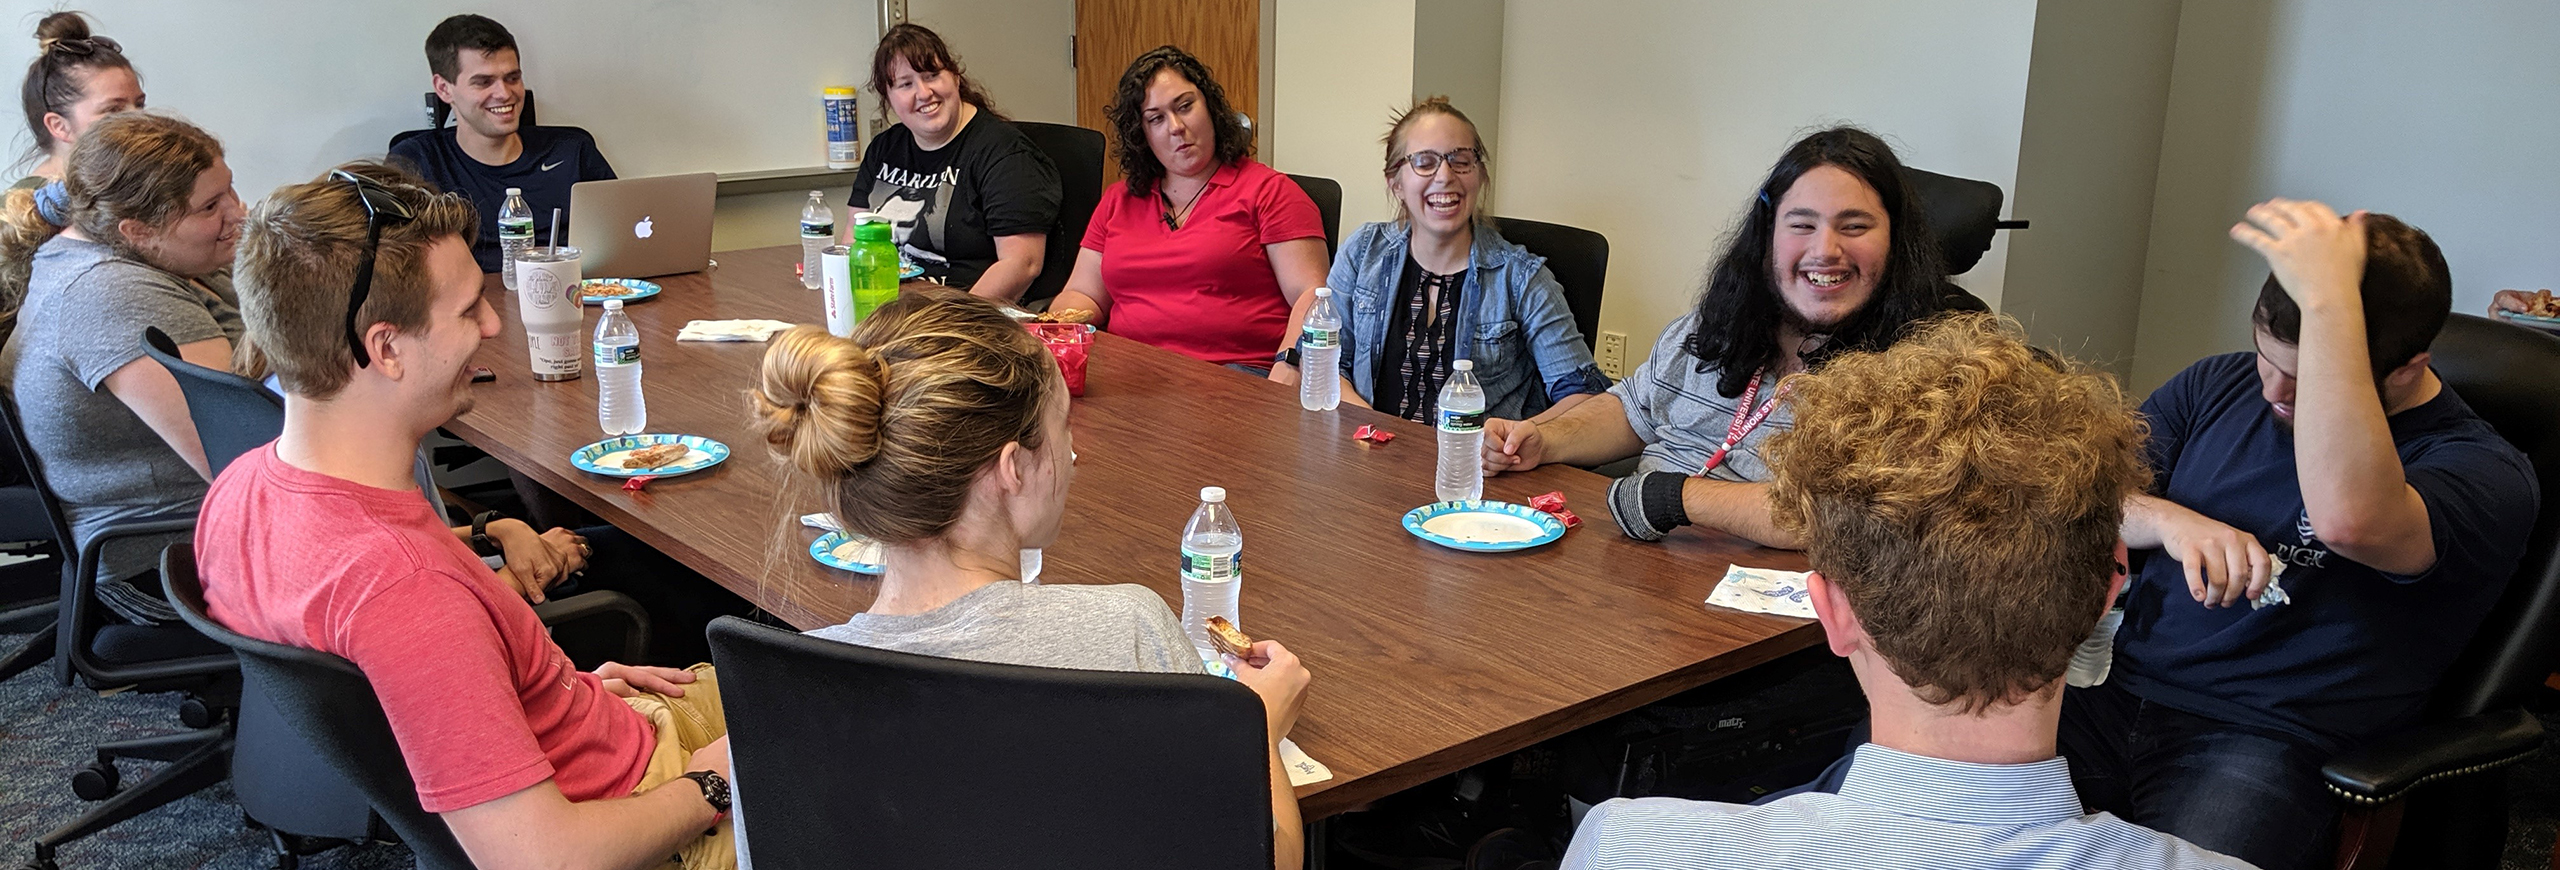 Students laughing together at a conference table.